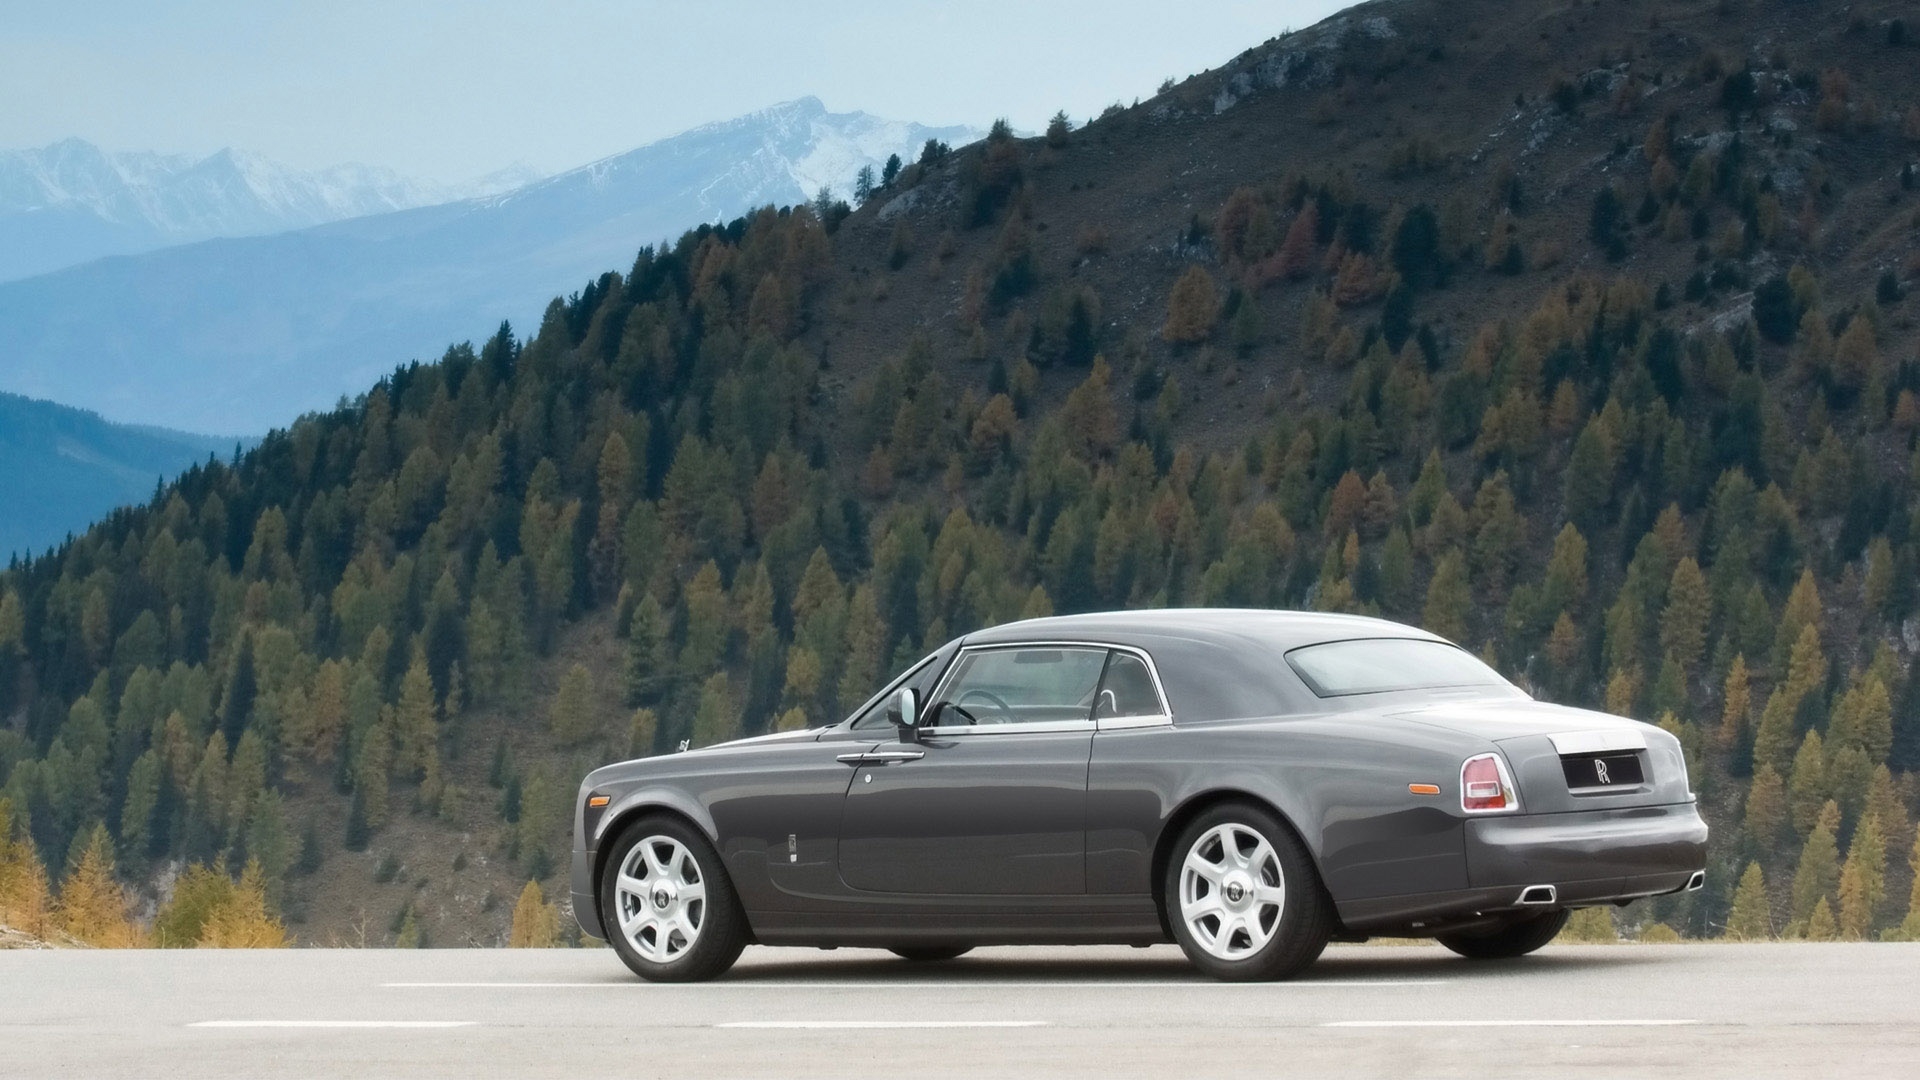 Amazing Rolls Royce Side Angle for 1920 x 1080 HDTV 1080p resolution